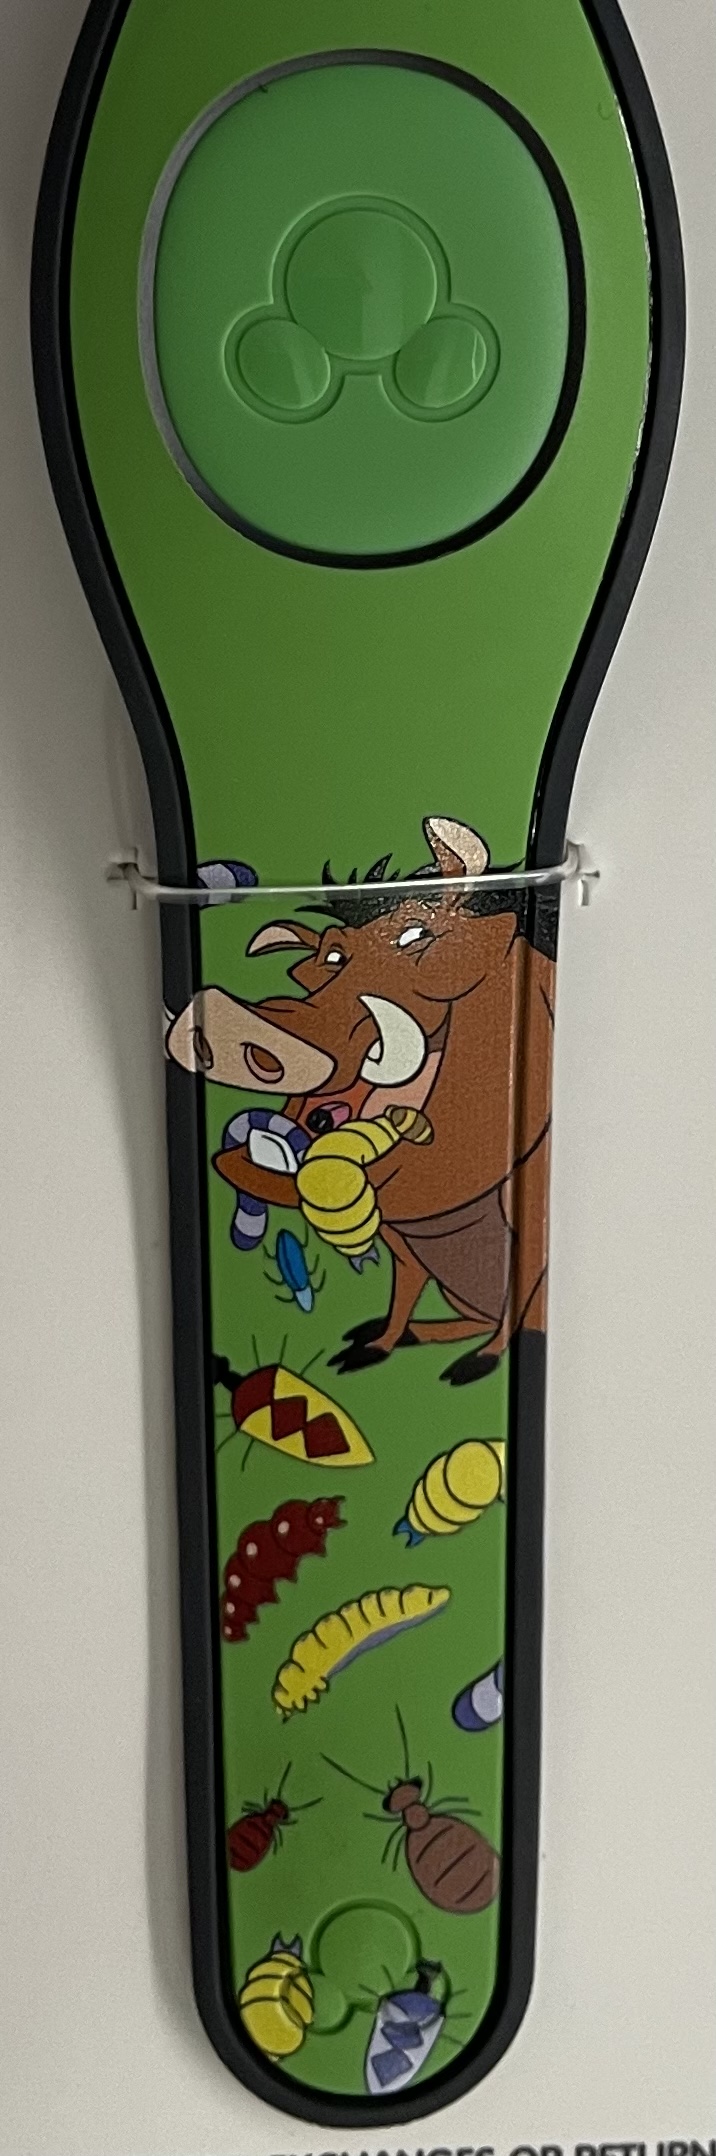 Pumbaa Open Edition MagicBand has been released today